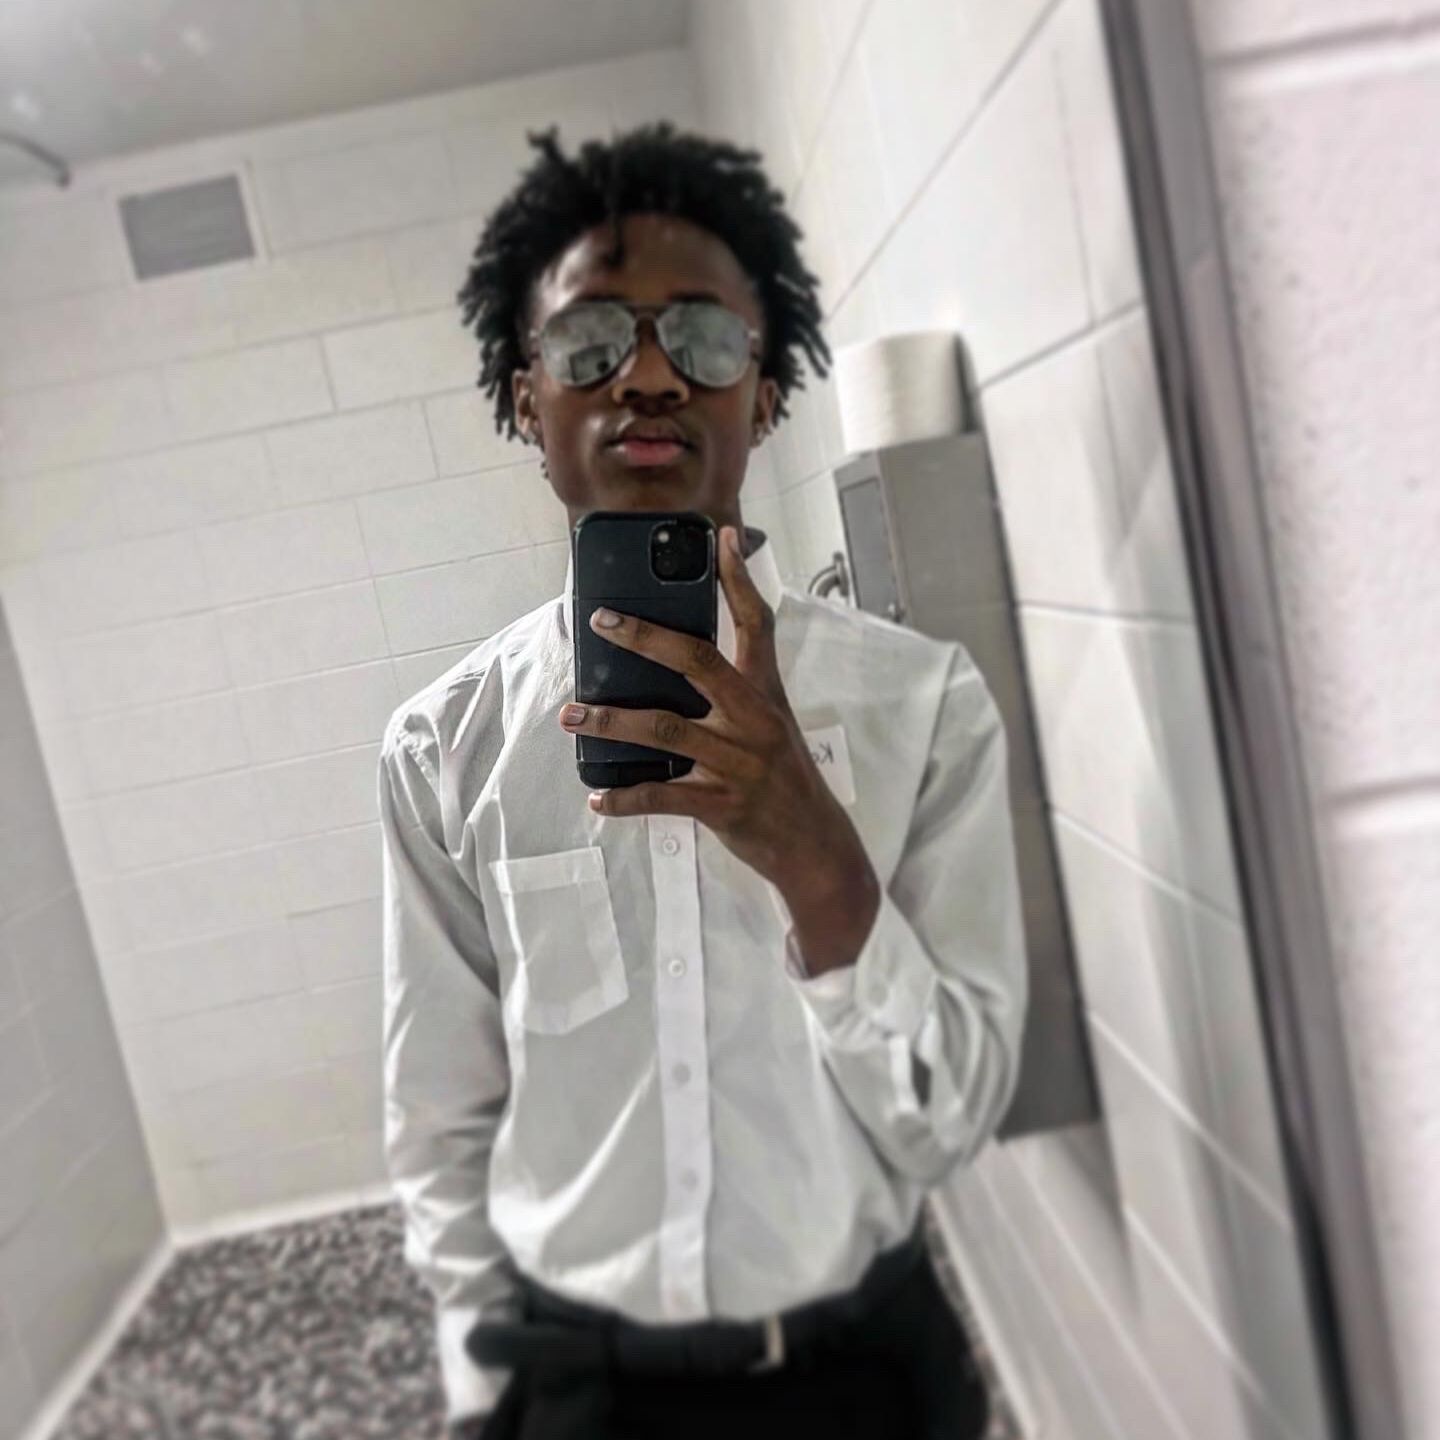 In this photo, Kamauri I, a senior at Chicago Bulls College Prep, is taking a selfie in a mirror. He is a young Black man with short black hair, wearing shades, a white button-up shirt and black dress pants.